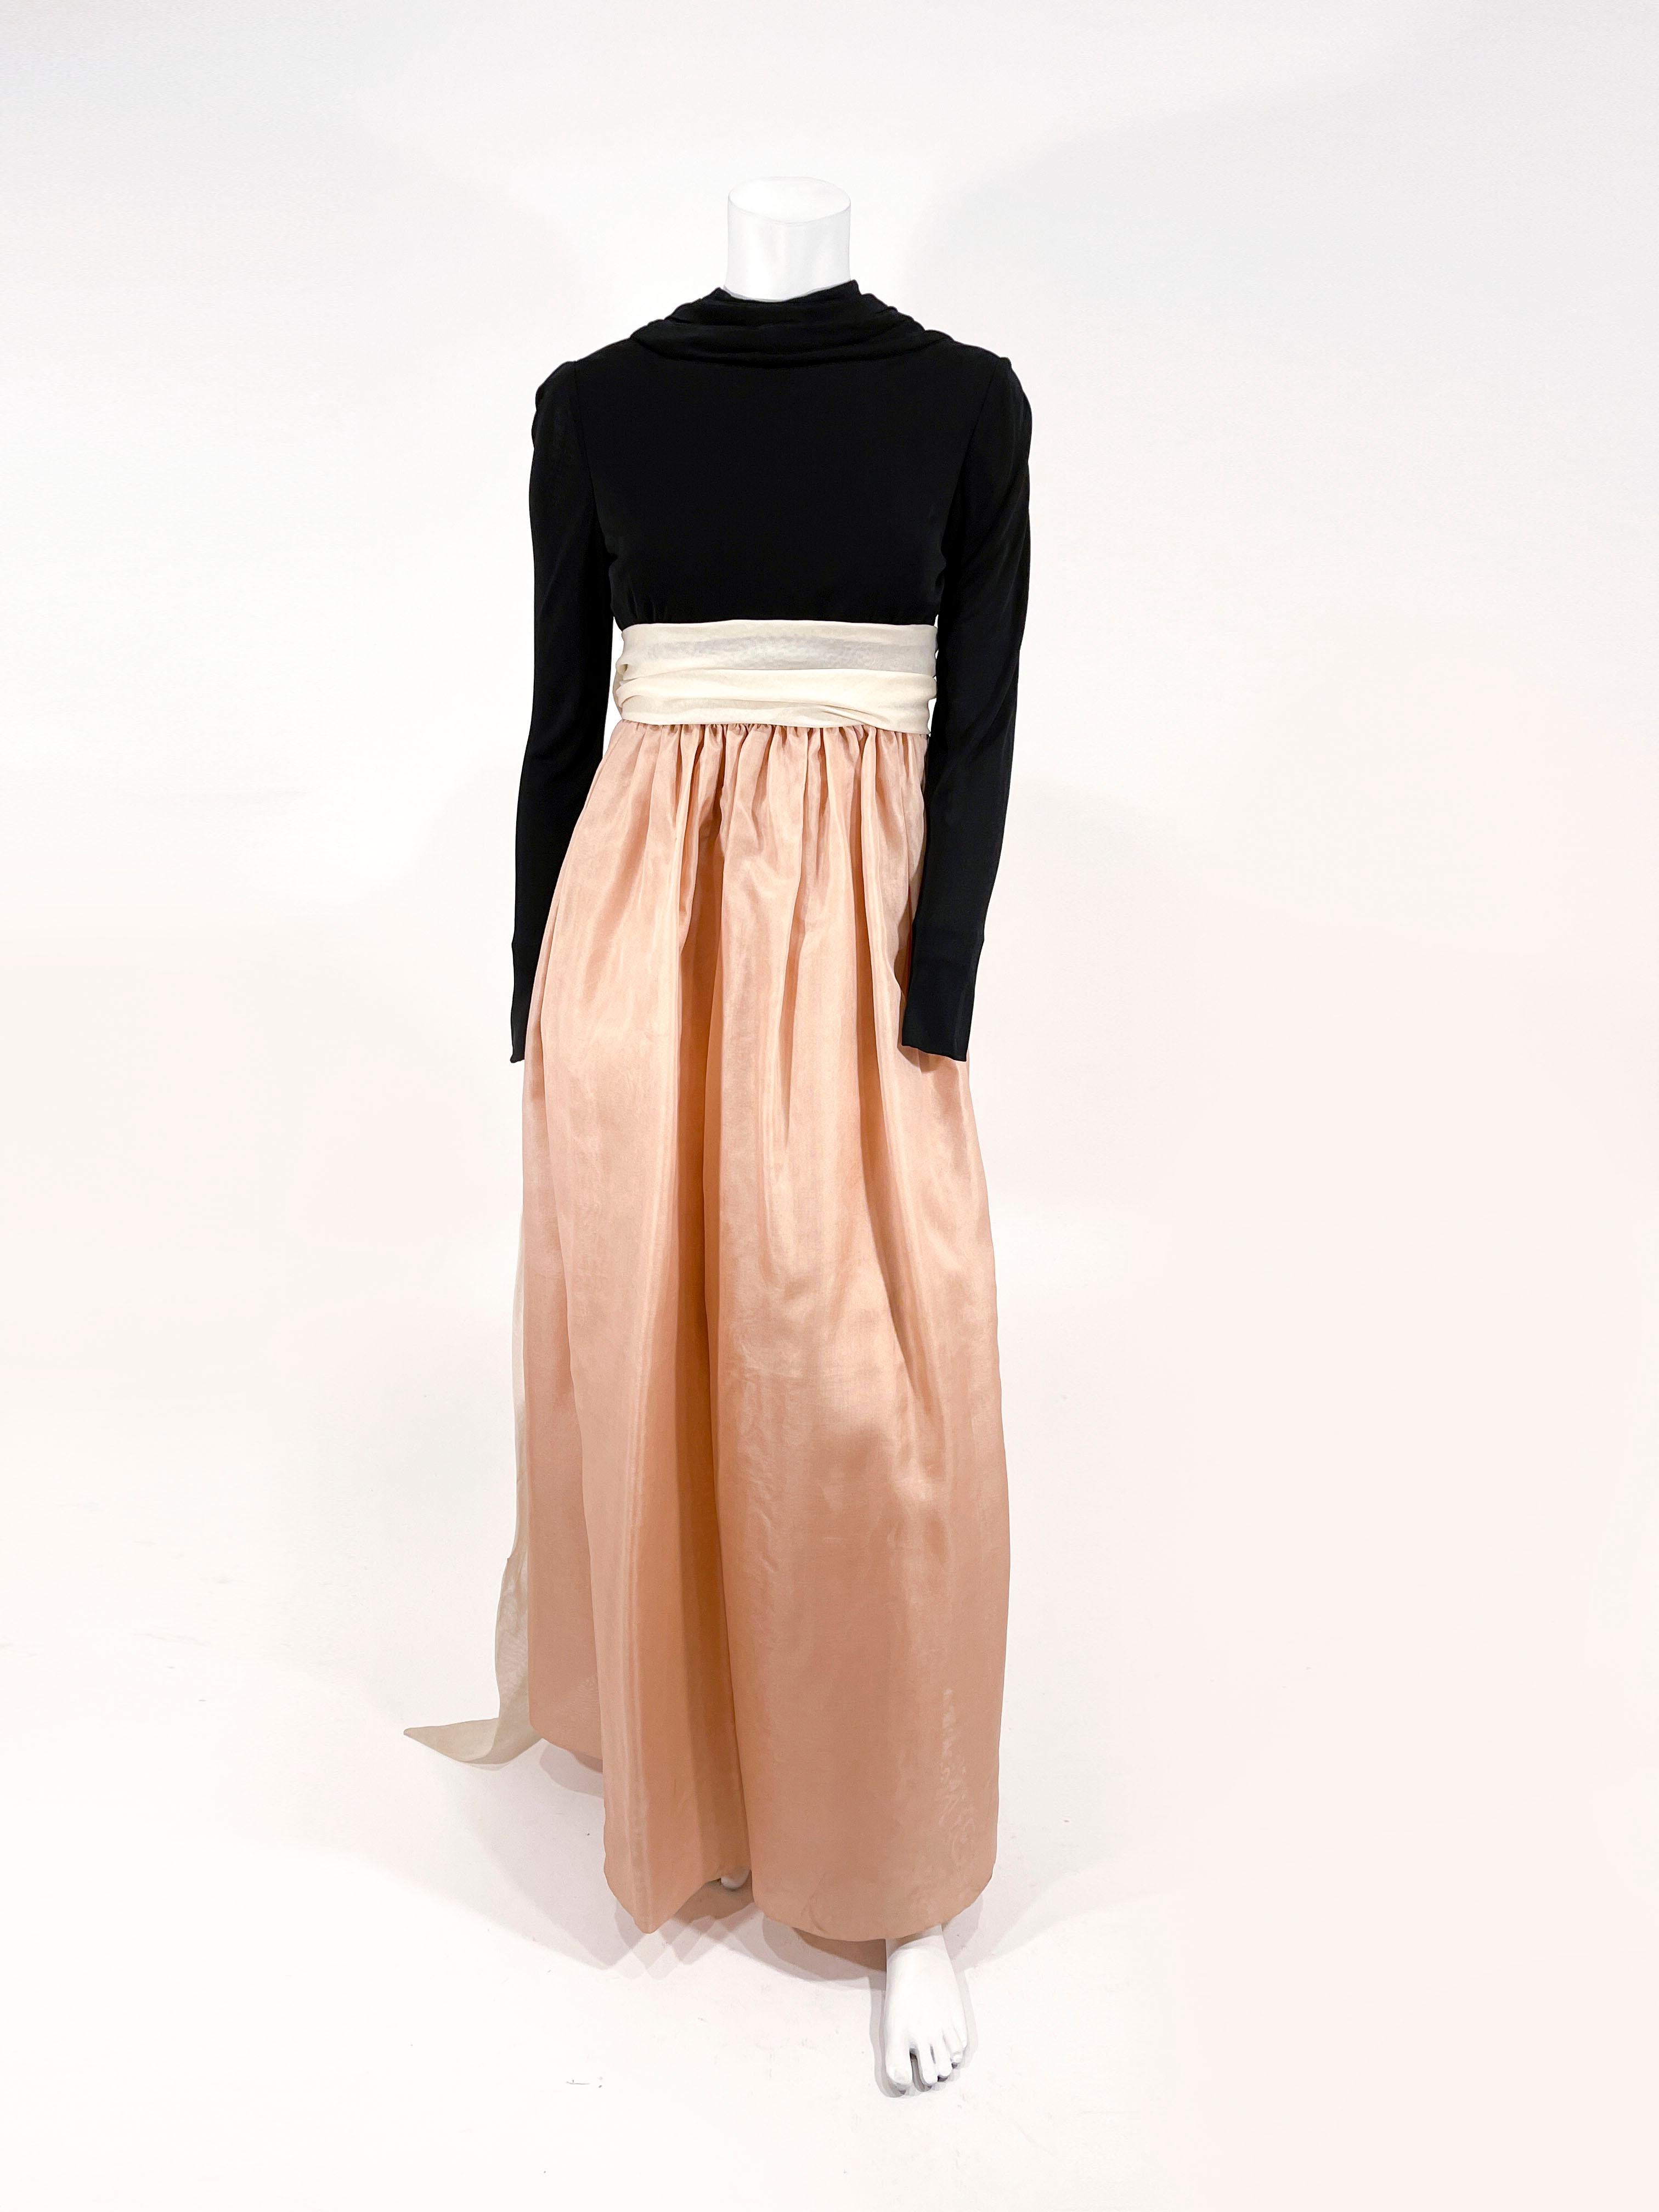 Late 1970s Bill Blass full length gown with a silk jersey bodice featuring a high gathered neckline that complements the long sleeves. The full length tan organza skirt is gathered around the waist and has an attached wide beige was it sash that